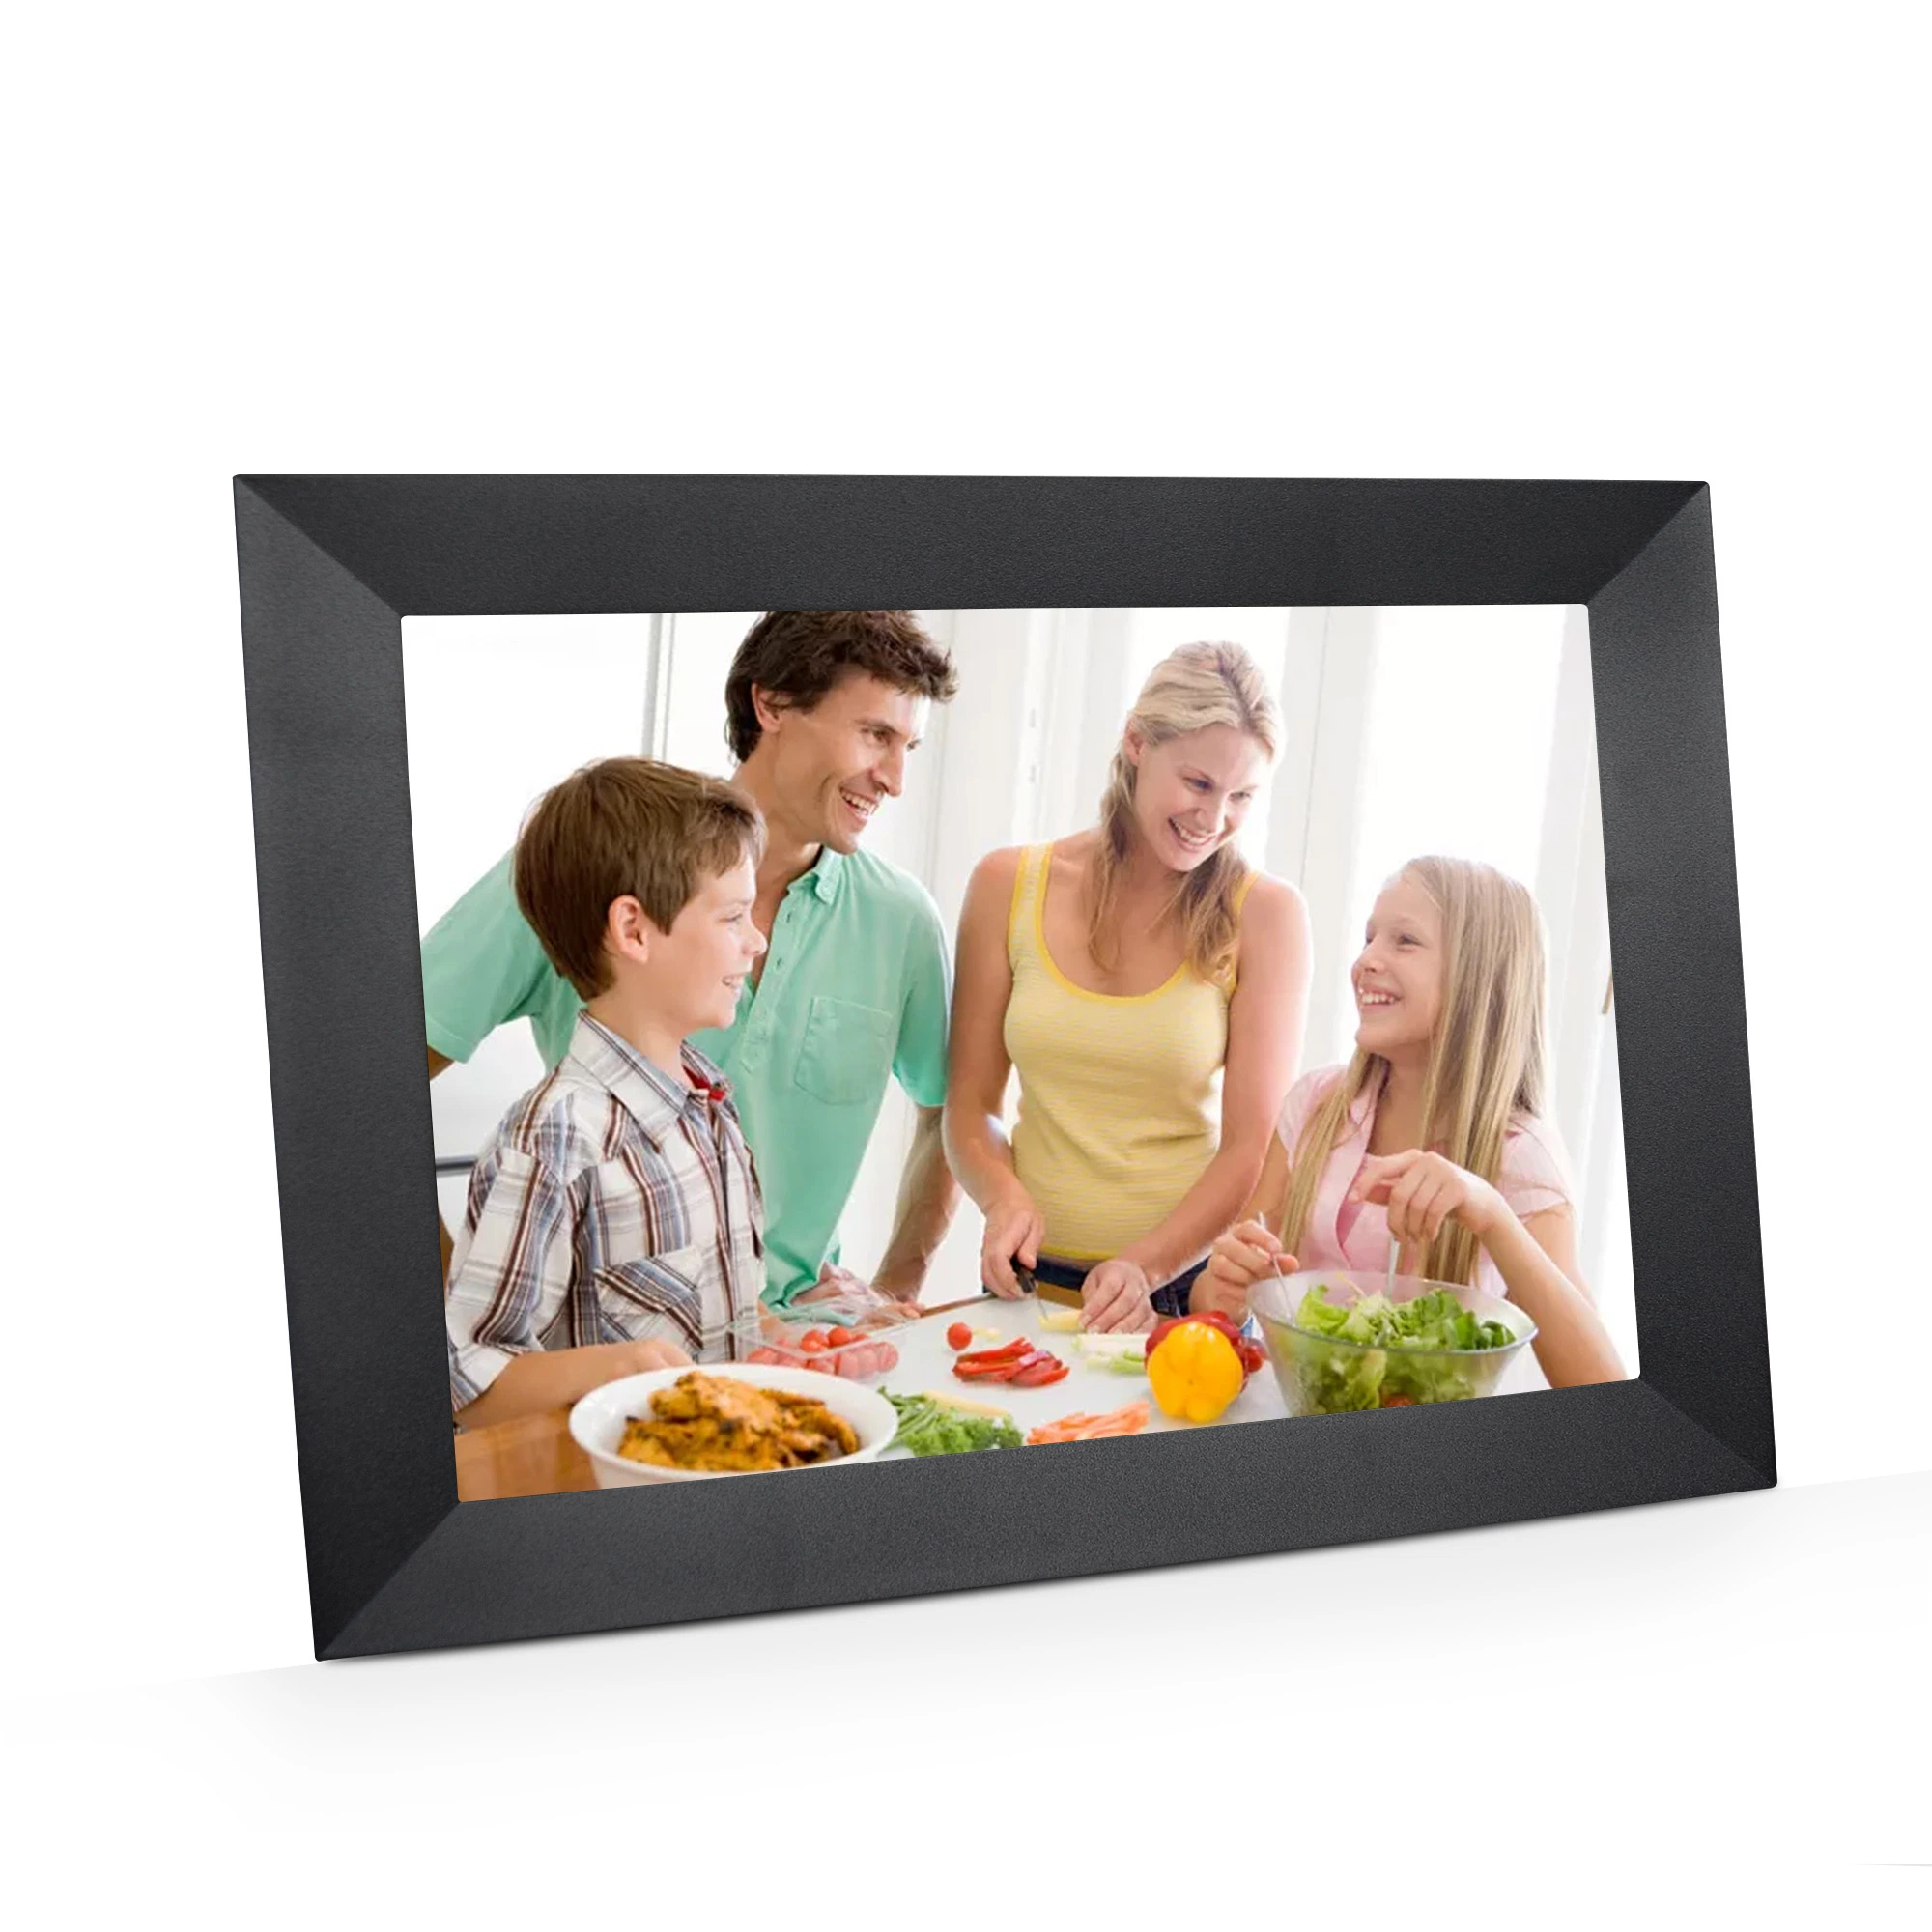 7 Inch Cheaper Electronic Motion Sensor Digital Picture Photo Video Frame